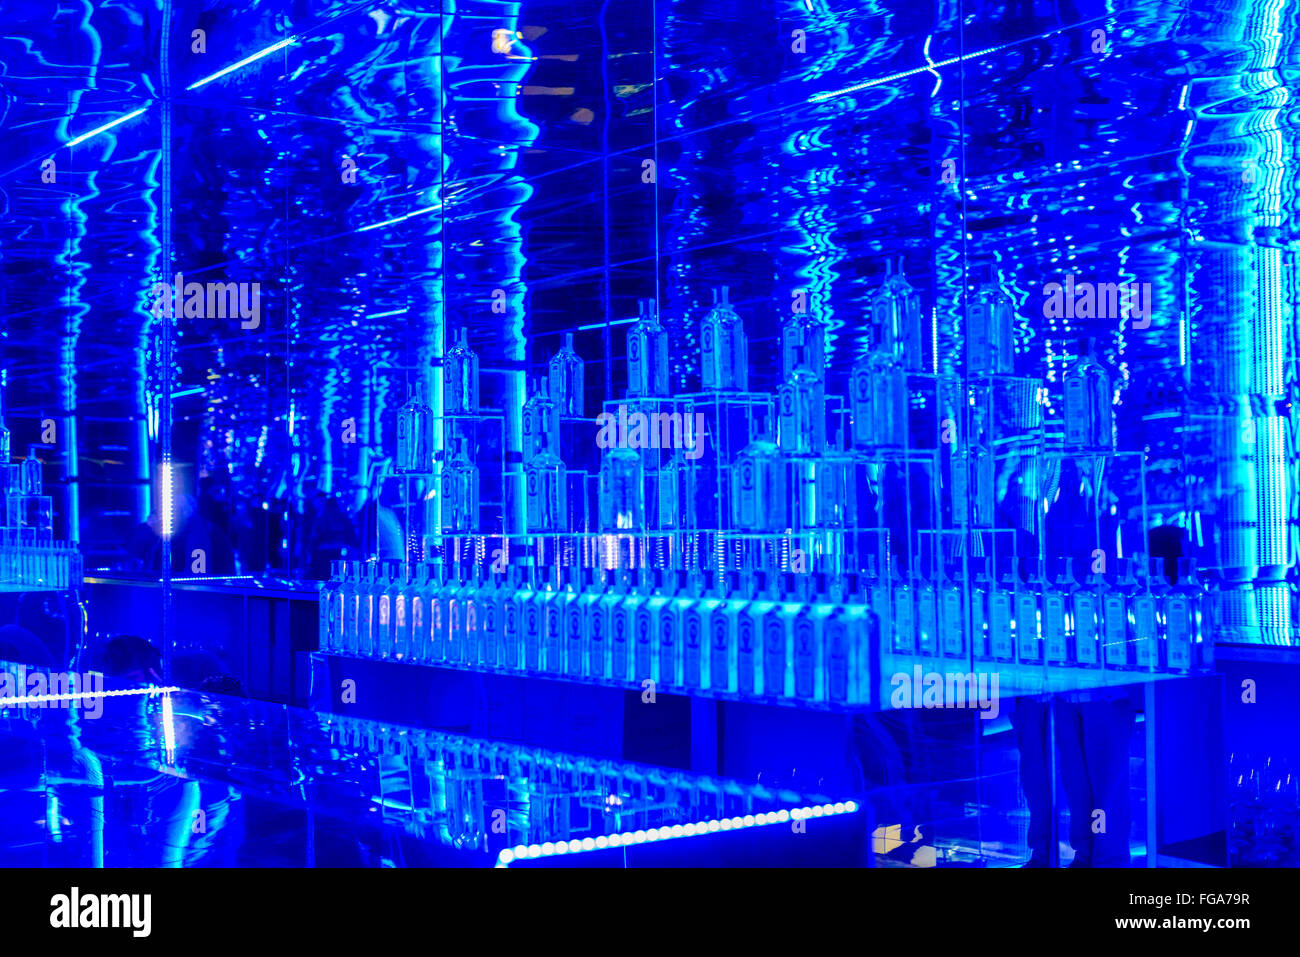 18th February 2016 Madrid, Spain. An empty bar section in The Art Room. The Bombay Sapphire have designed the MBFW 2016 Madrid kissing room with a spacious blue themed mirror surround hall, #TheatreRoom,  and The Art Room, with large LED screen that reflects the movements of people using Wii type technology at MBFW 2016 Madrid, Spain. © Lawrence JC Baron/Alamy Live News. Stock Photo